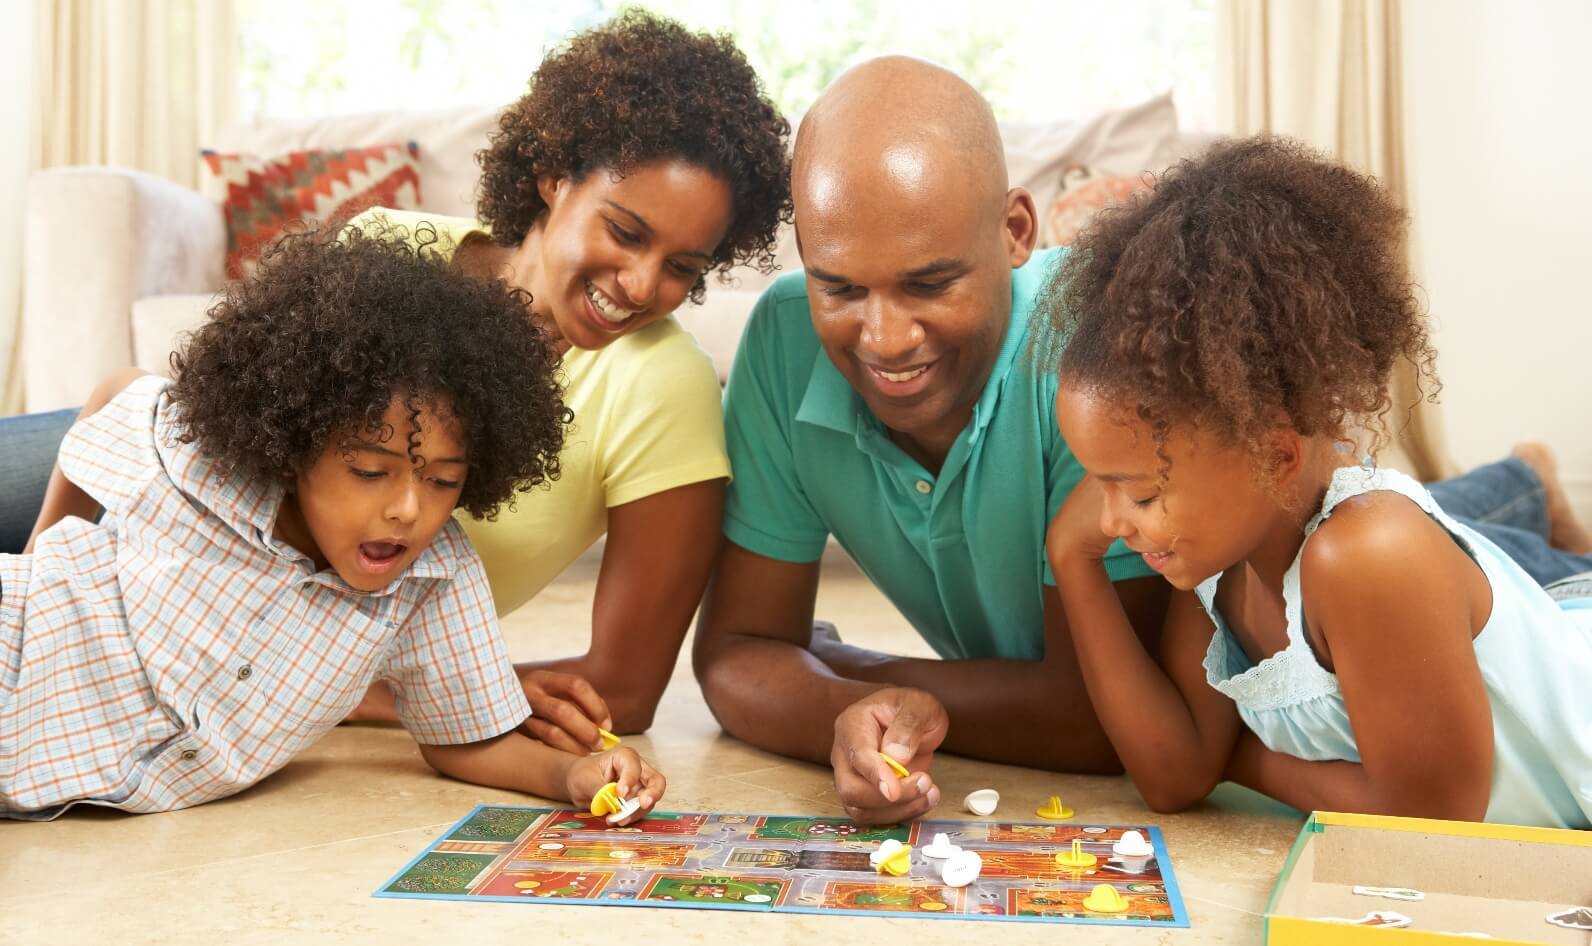 Have a family game night